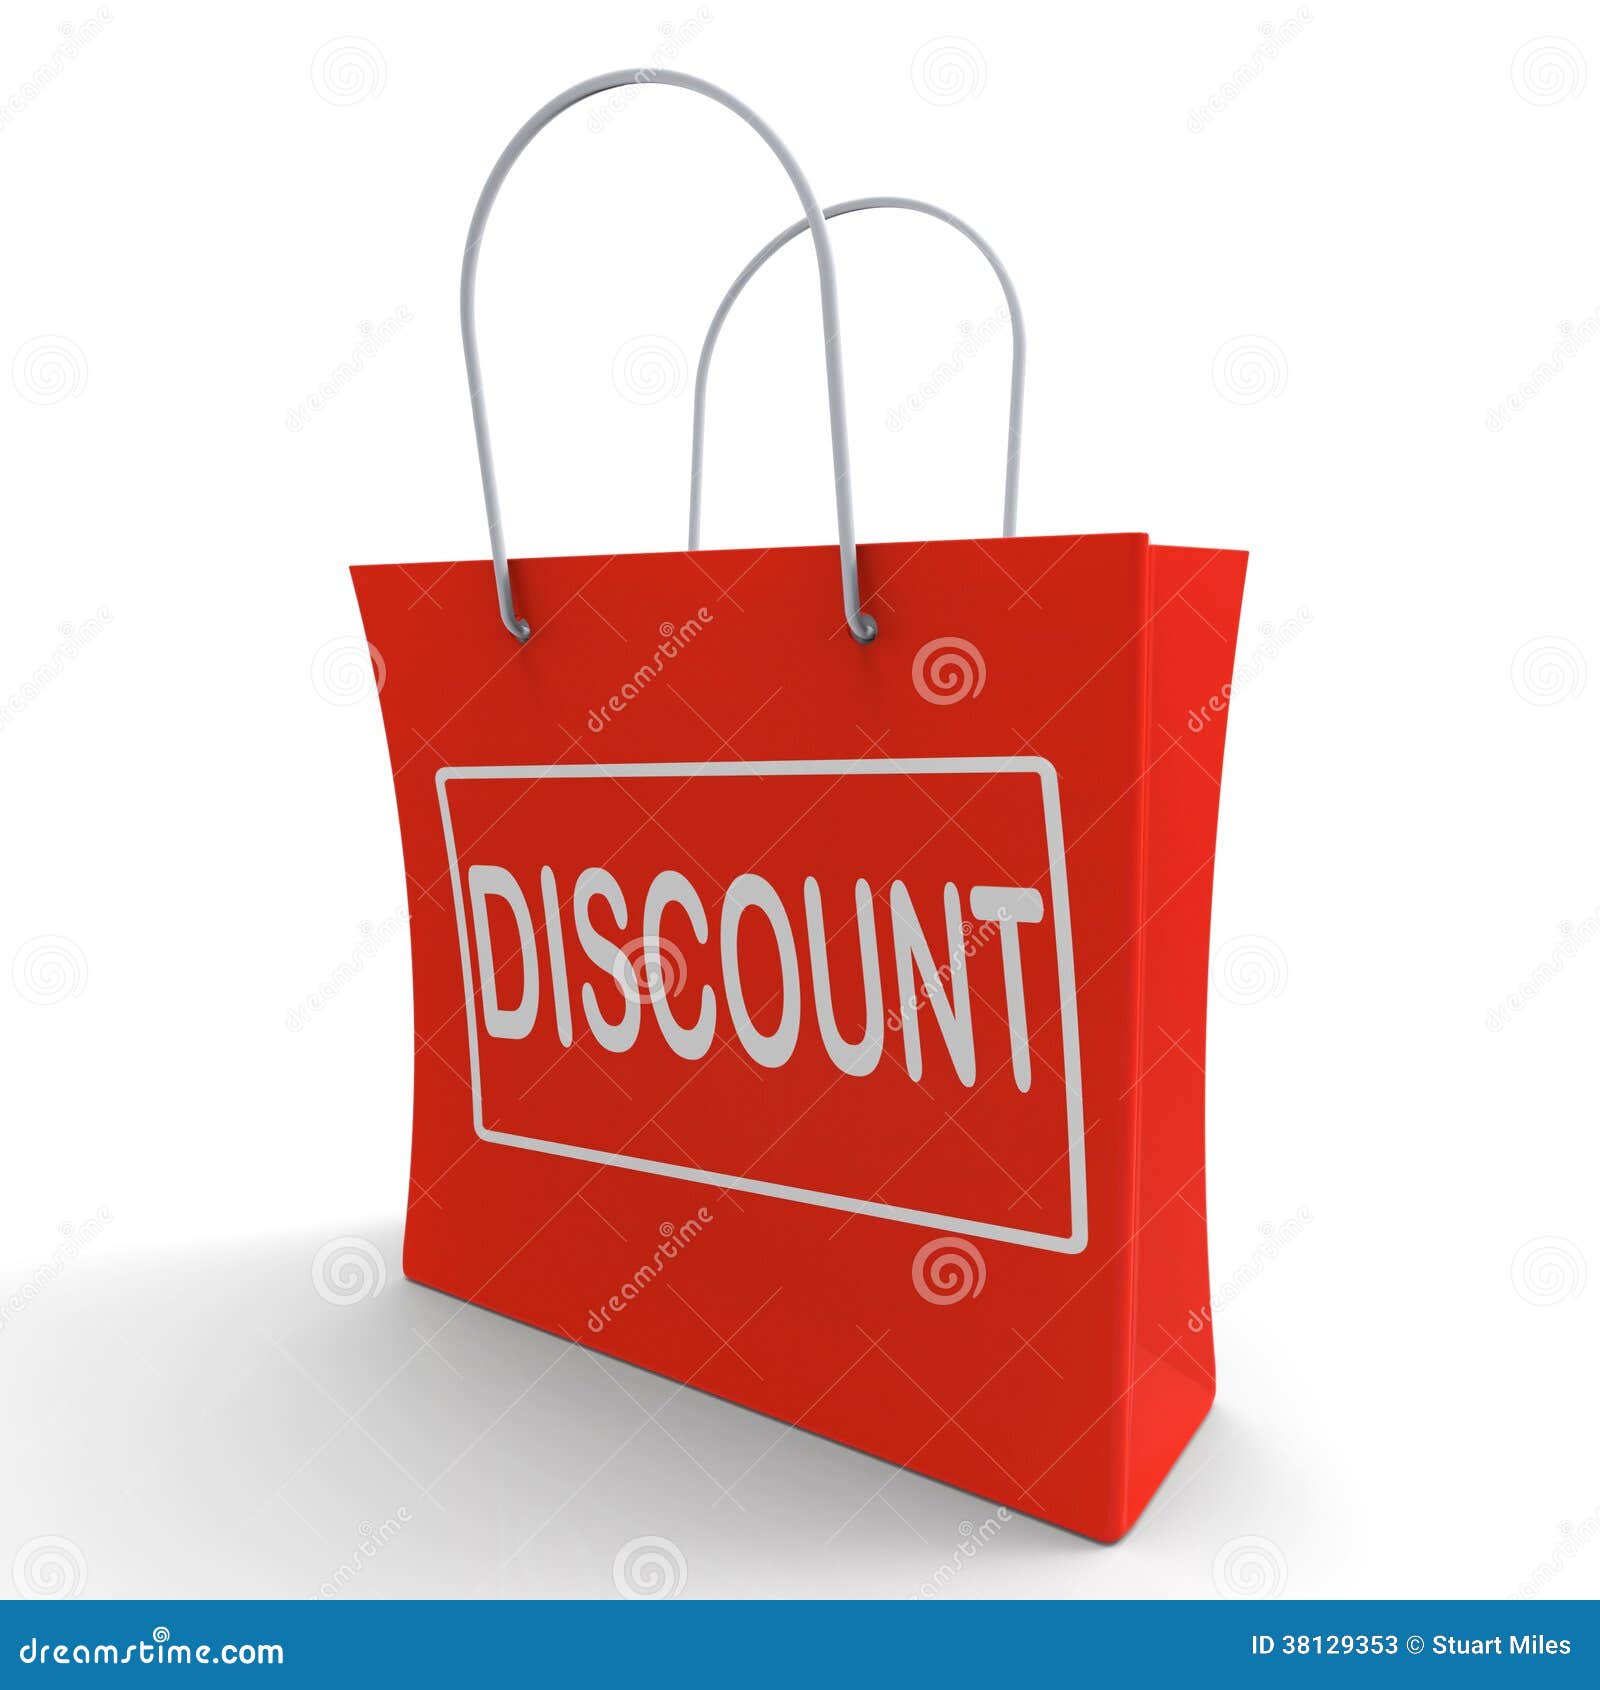 Discount Shopping Bag Means Cut Price Or Reduce Stock Image | 0 #38129353